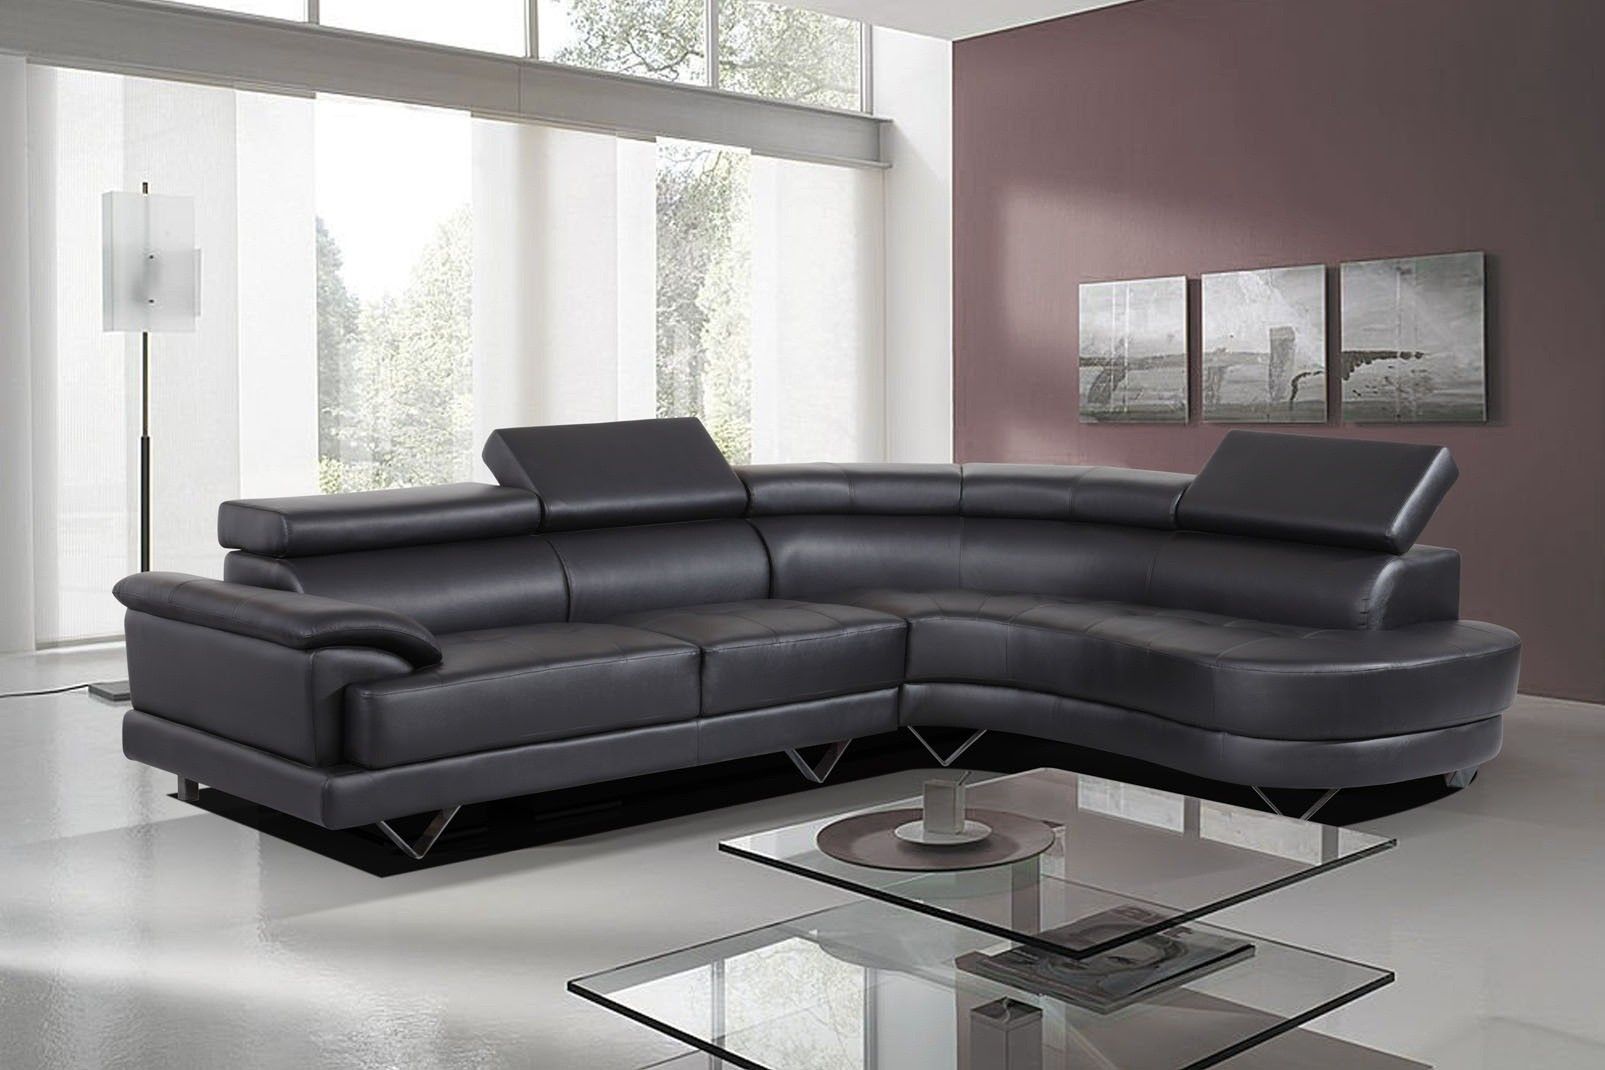 Furniture: Stunning Leather Corner Sofas Cheap Leather Corner Sofas With White Leather Corner Sofas (View 4 of 10)